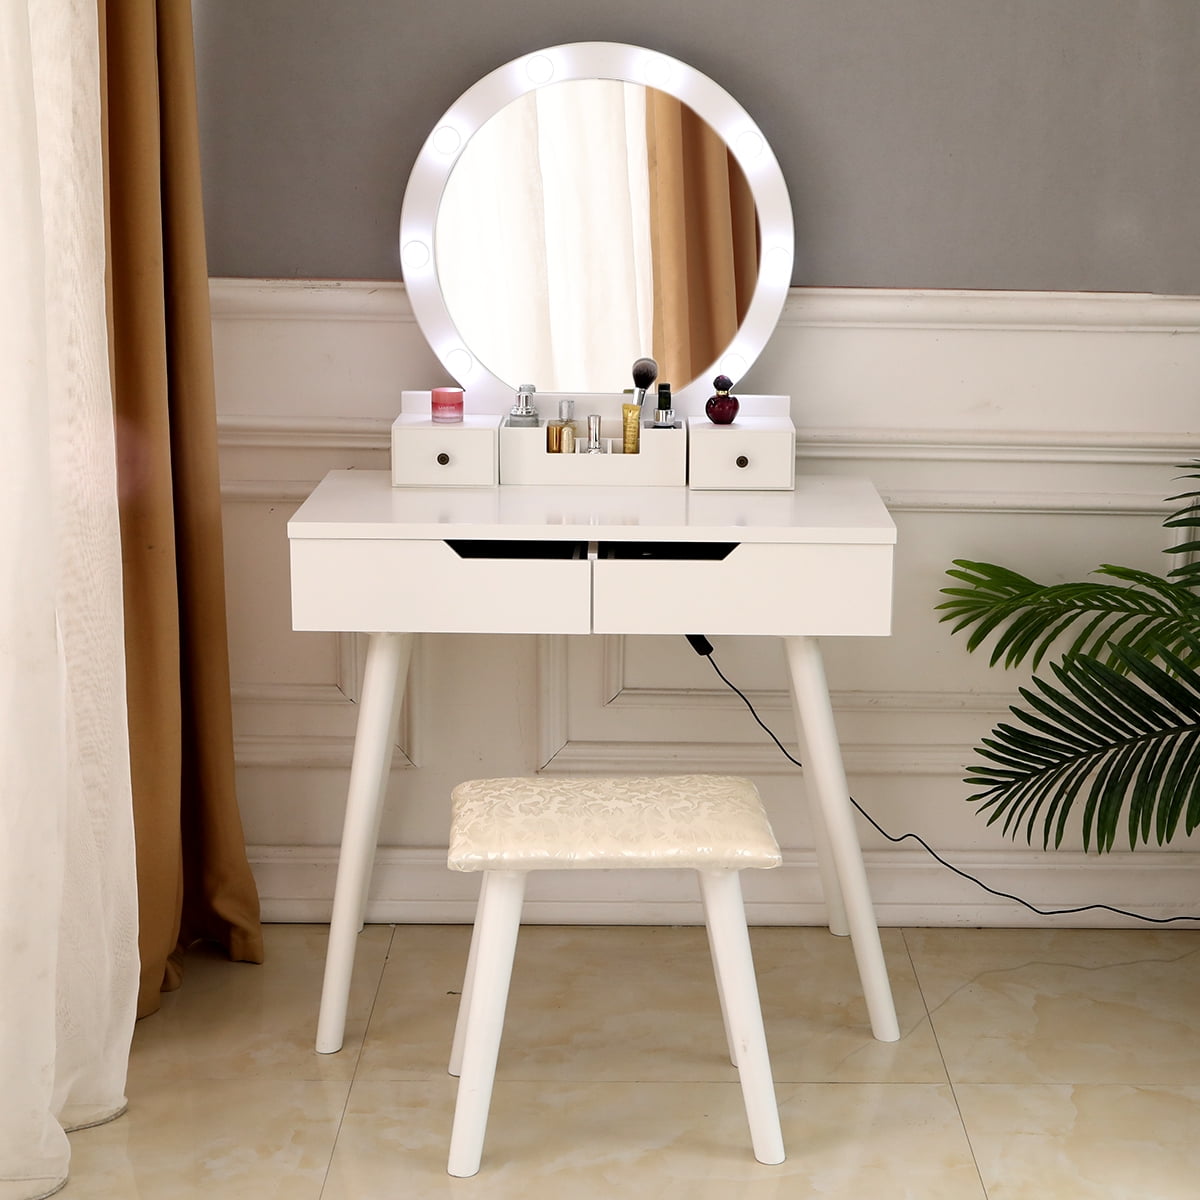 Vanity Makeup Dressing Table Stool Set Round Mirror With 8 Light Bulbs 2 Drawers for sale online 